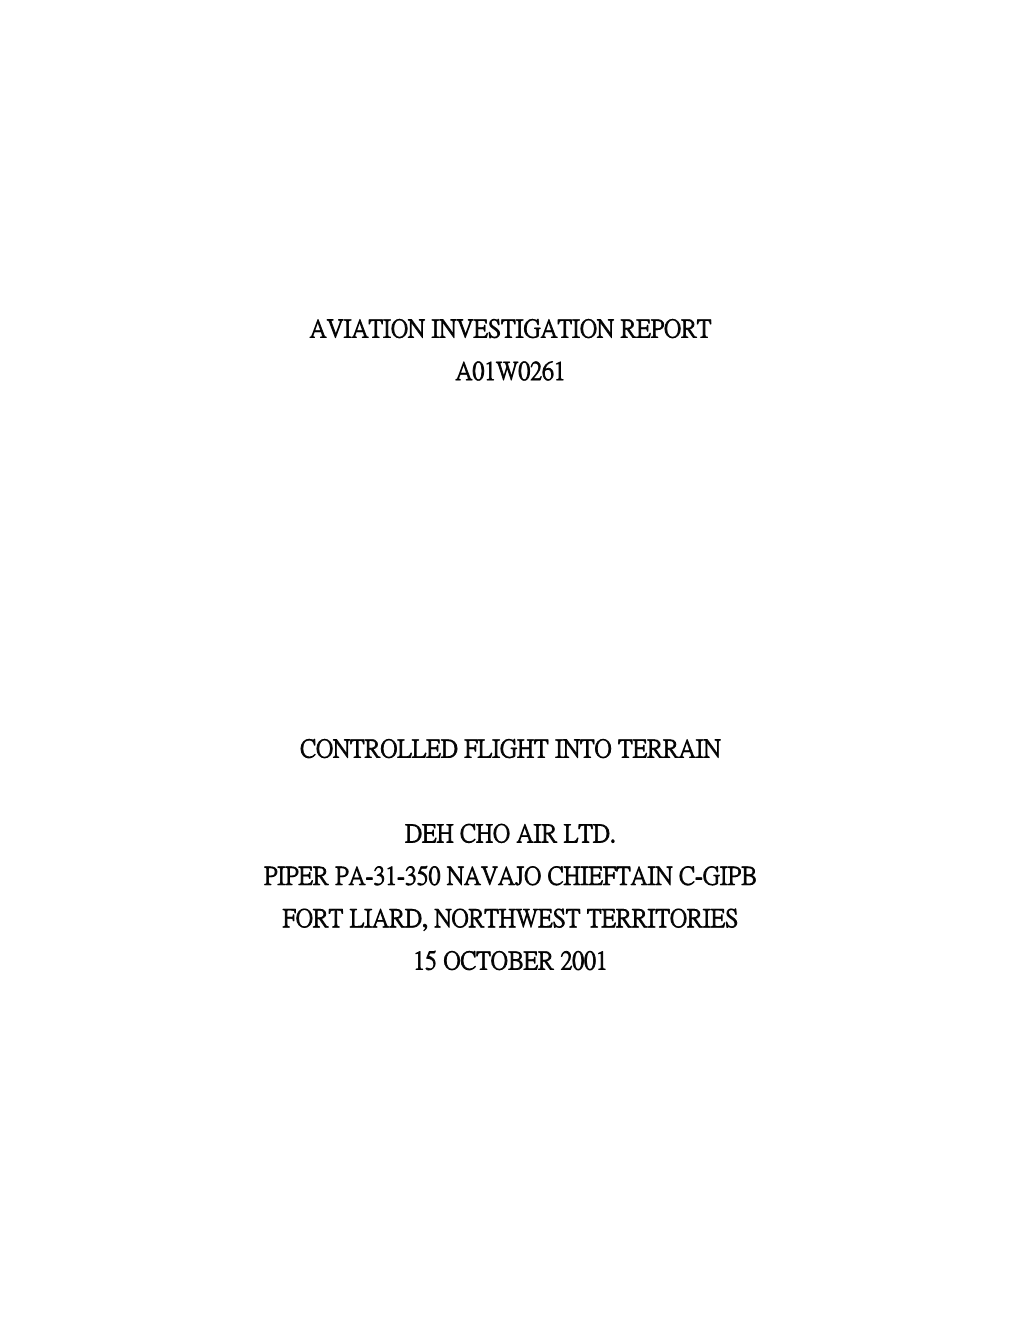 Aviation Investigation Report A01w0261 Controlled Flight